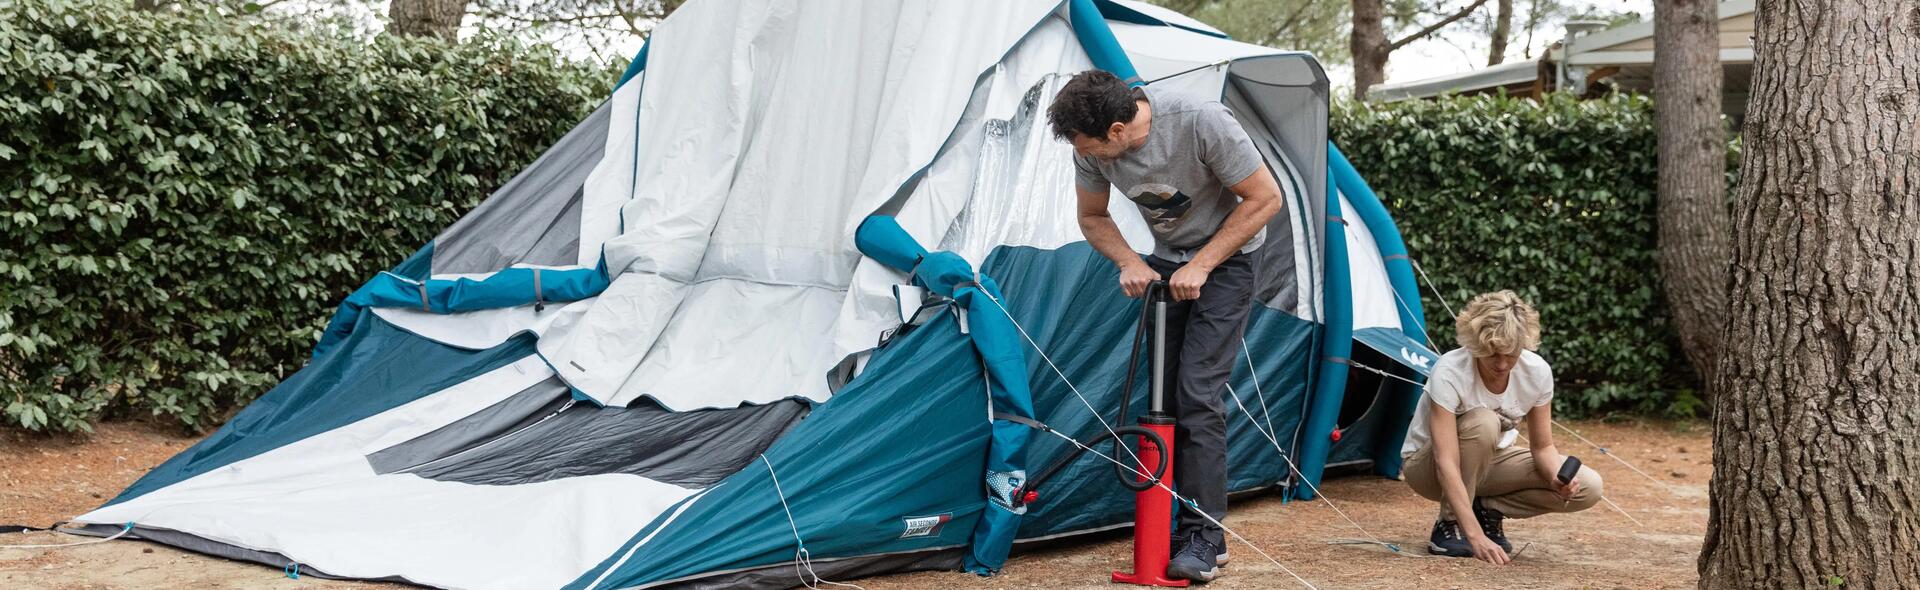 INFLATABLE TENTS